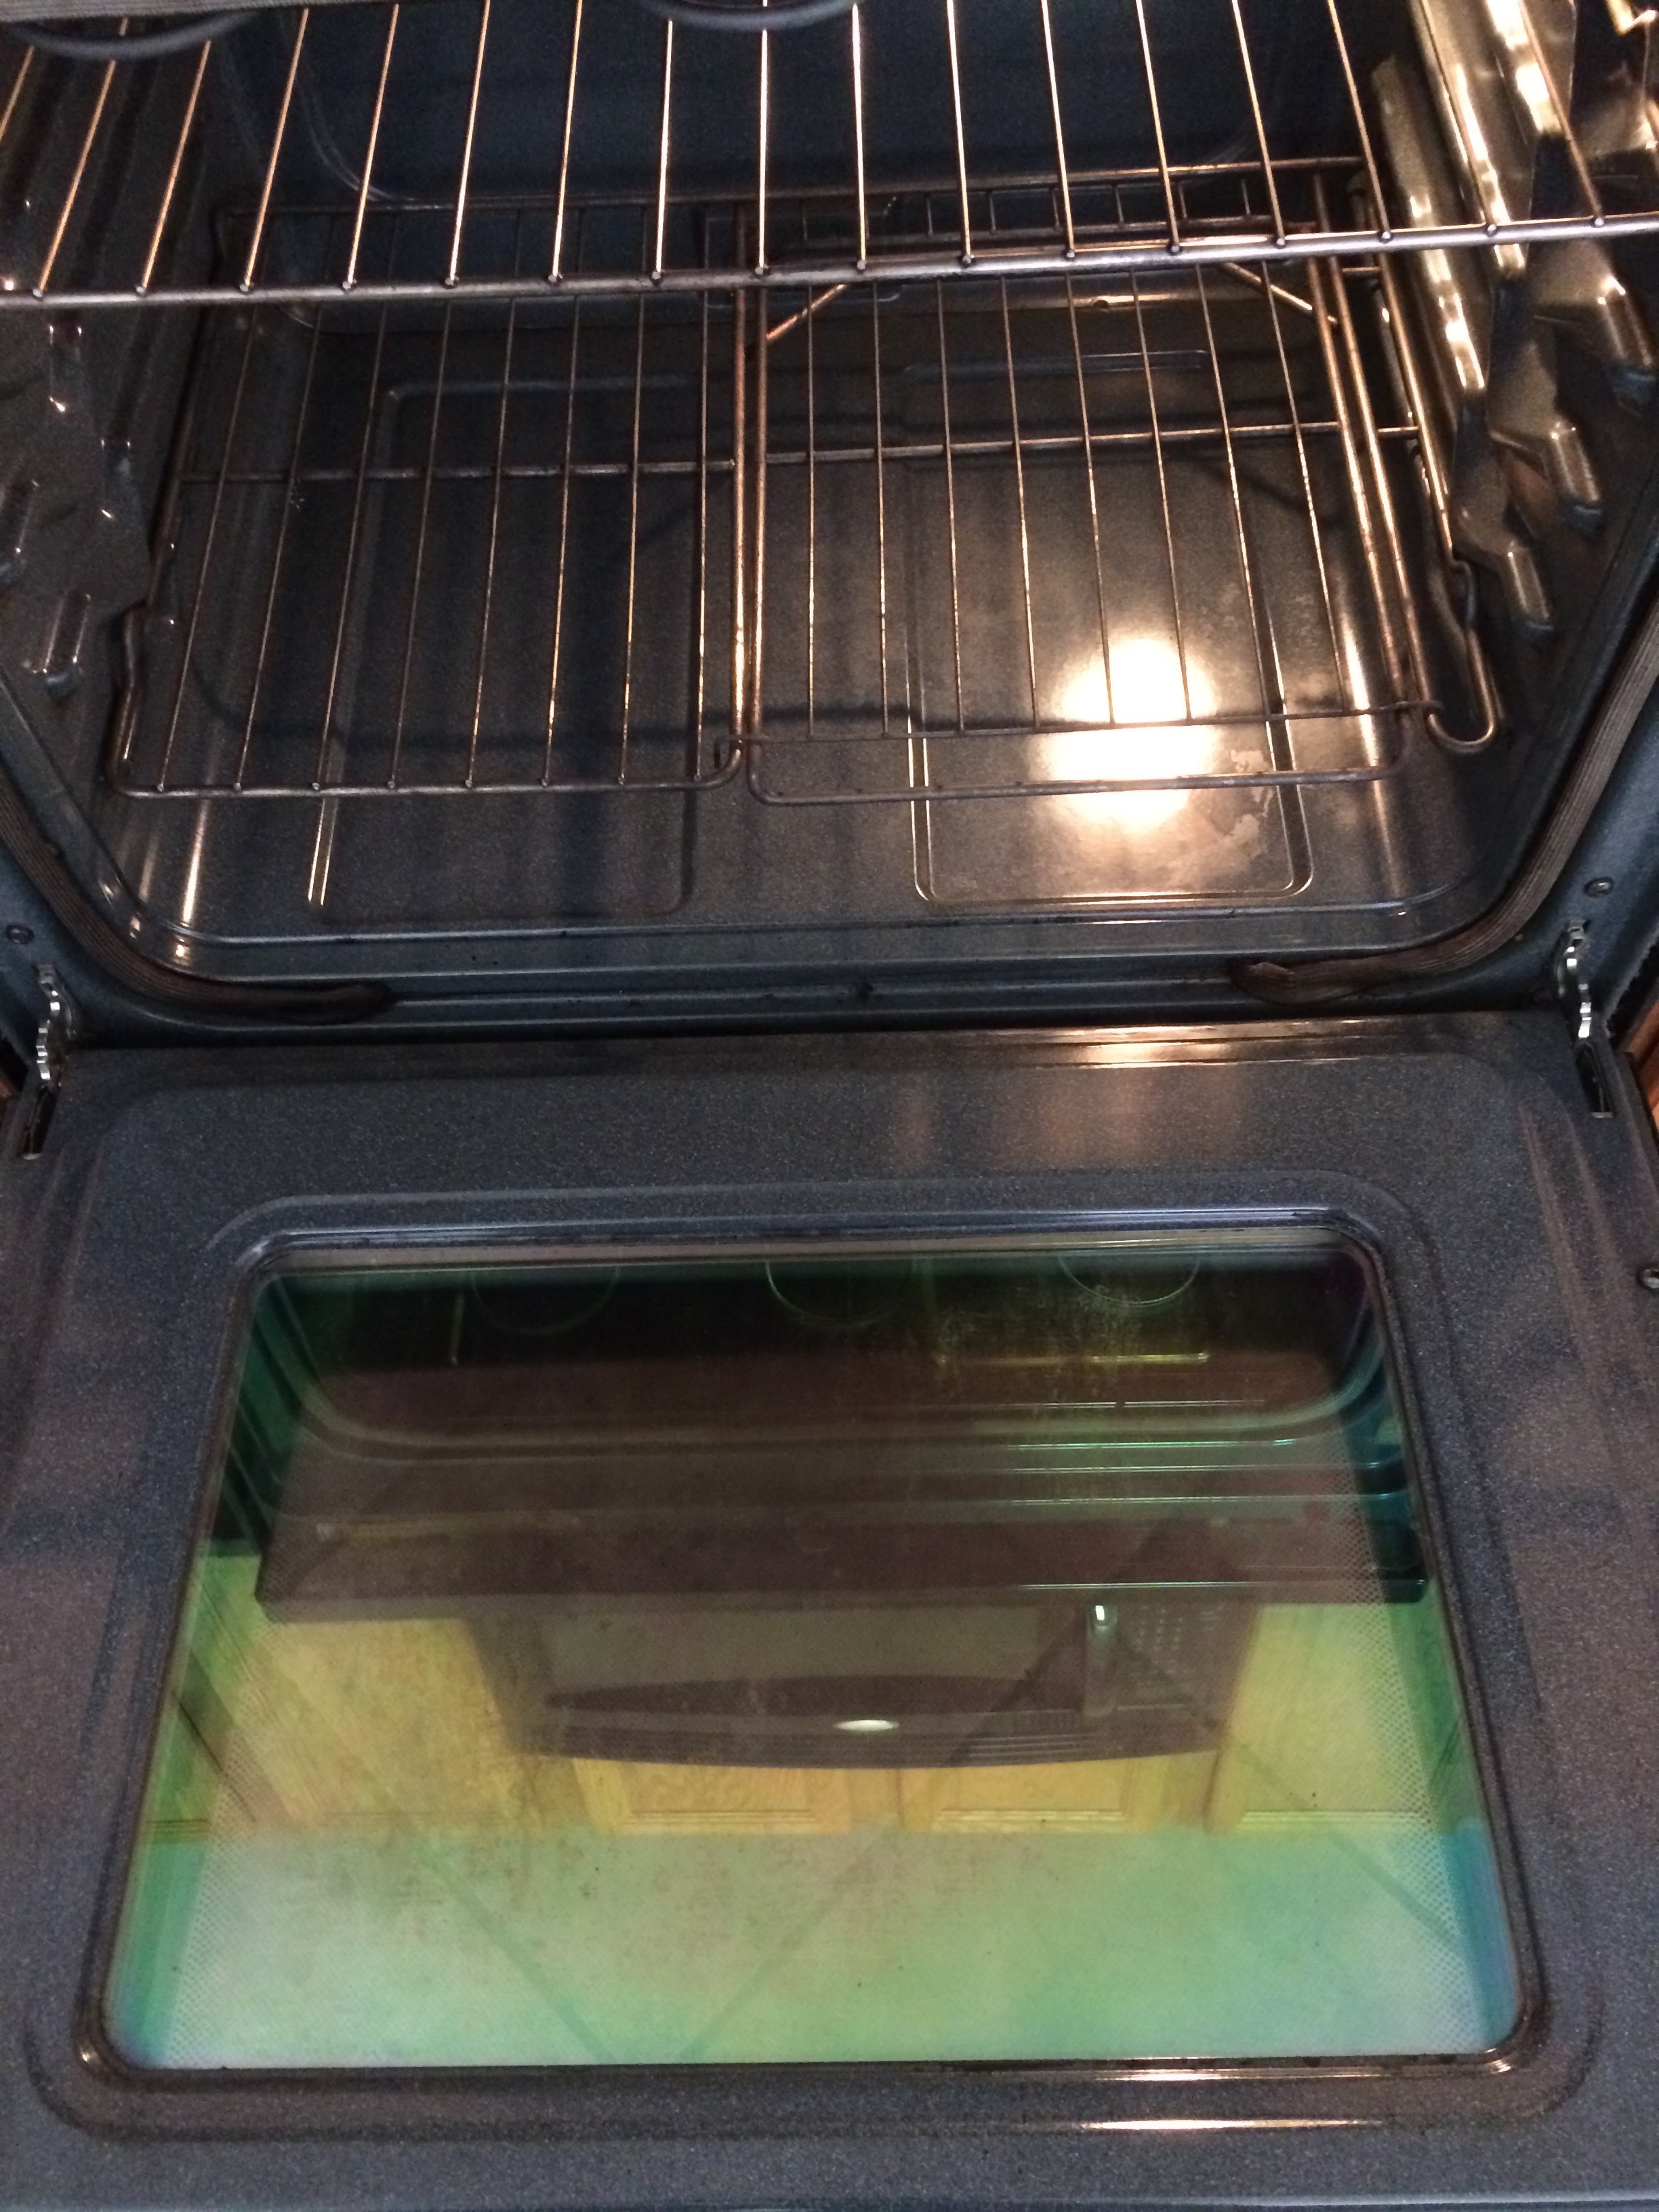 Cleaned oven